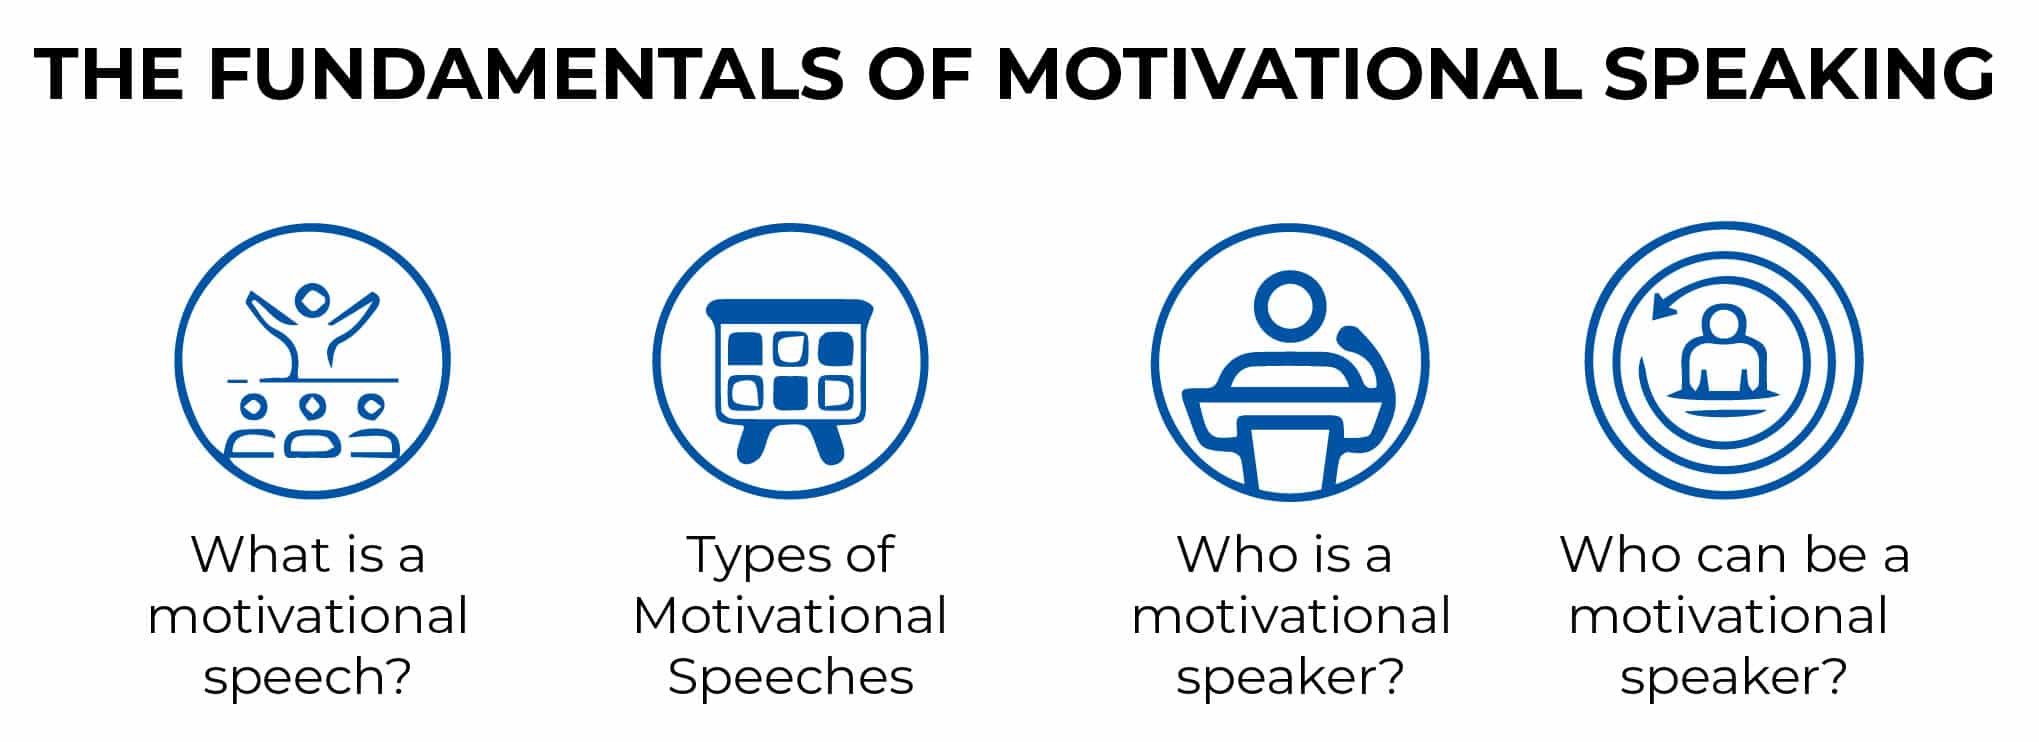 How to Become a Motivational Speaker: The Definitive Guide motivational speaker